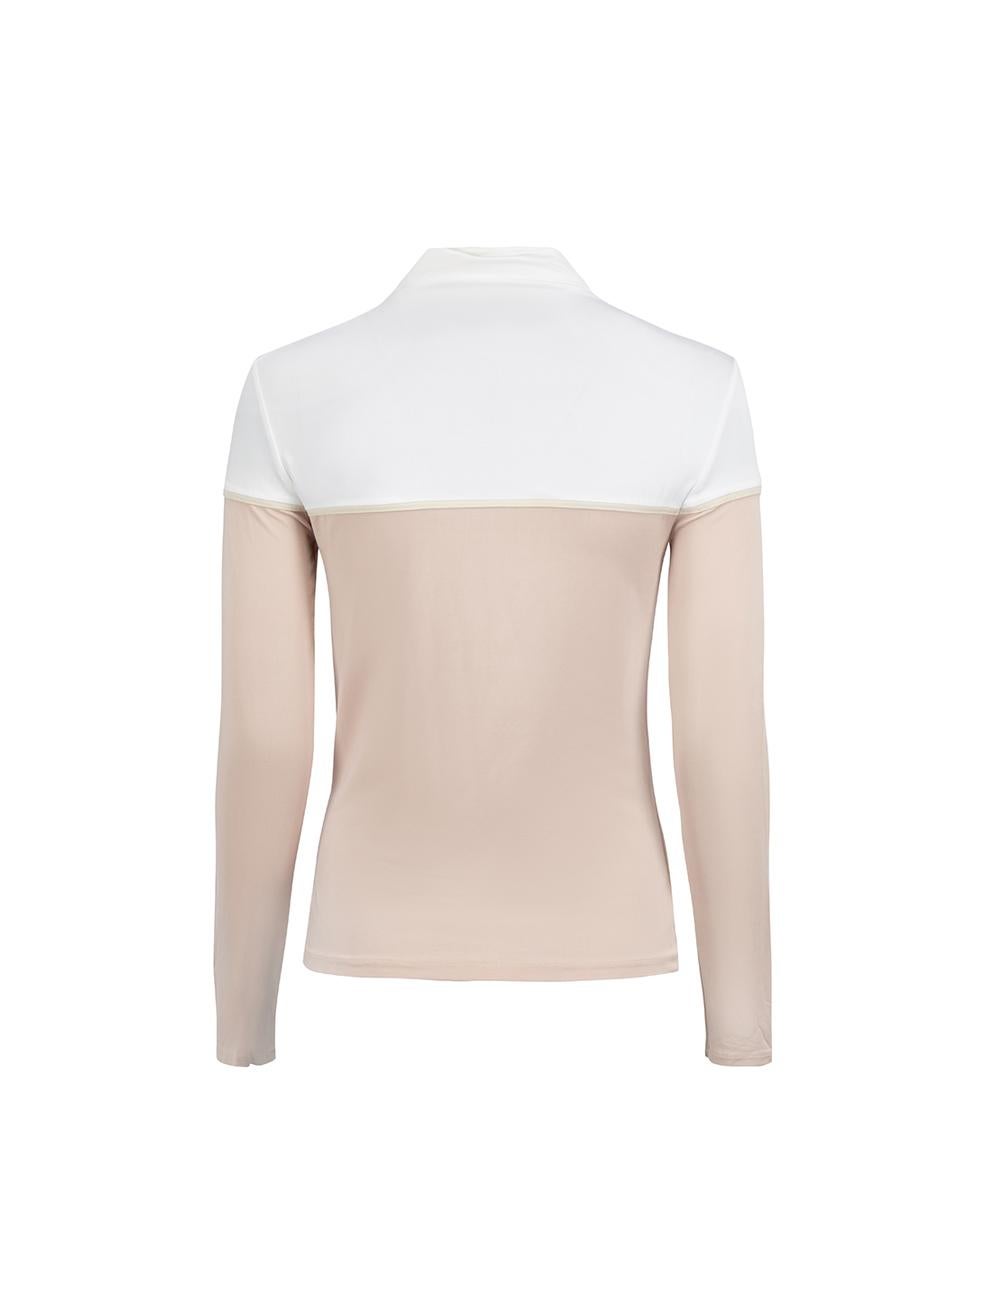 CONDITION is Very good. Minimal wear to top is evident. Minimal wear to fabric with one or two discoloured marks found at centre front and back of shoulder on this used 'S Max Mara designer resale item.

Details
Pink
Synthetic
Top
Long